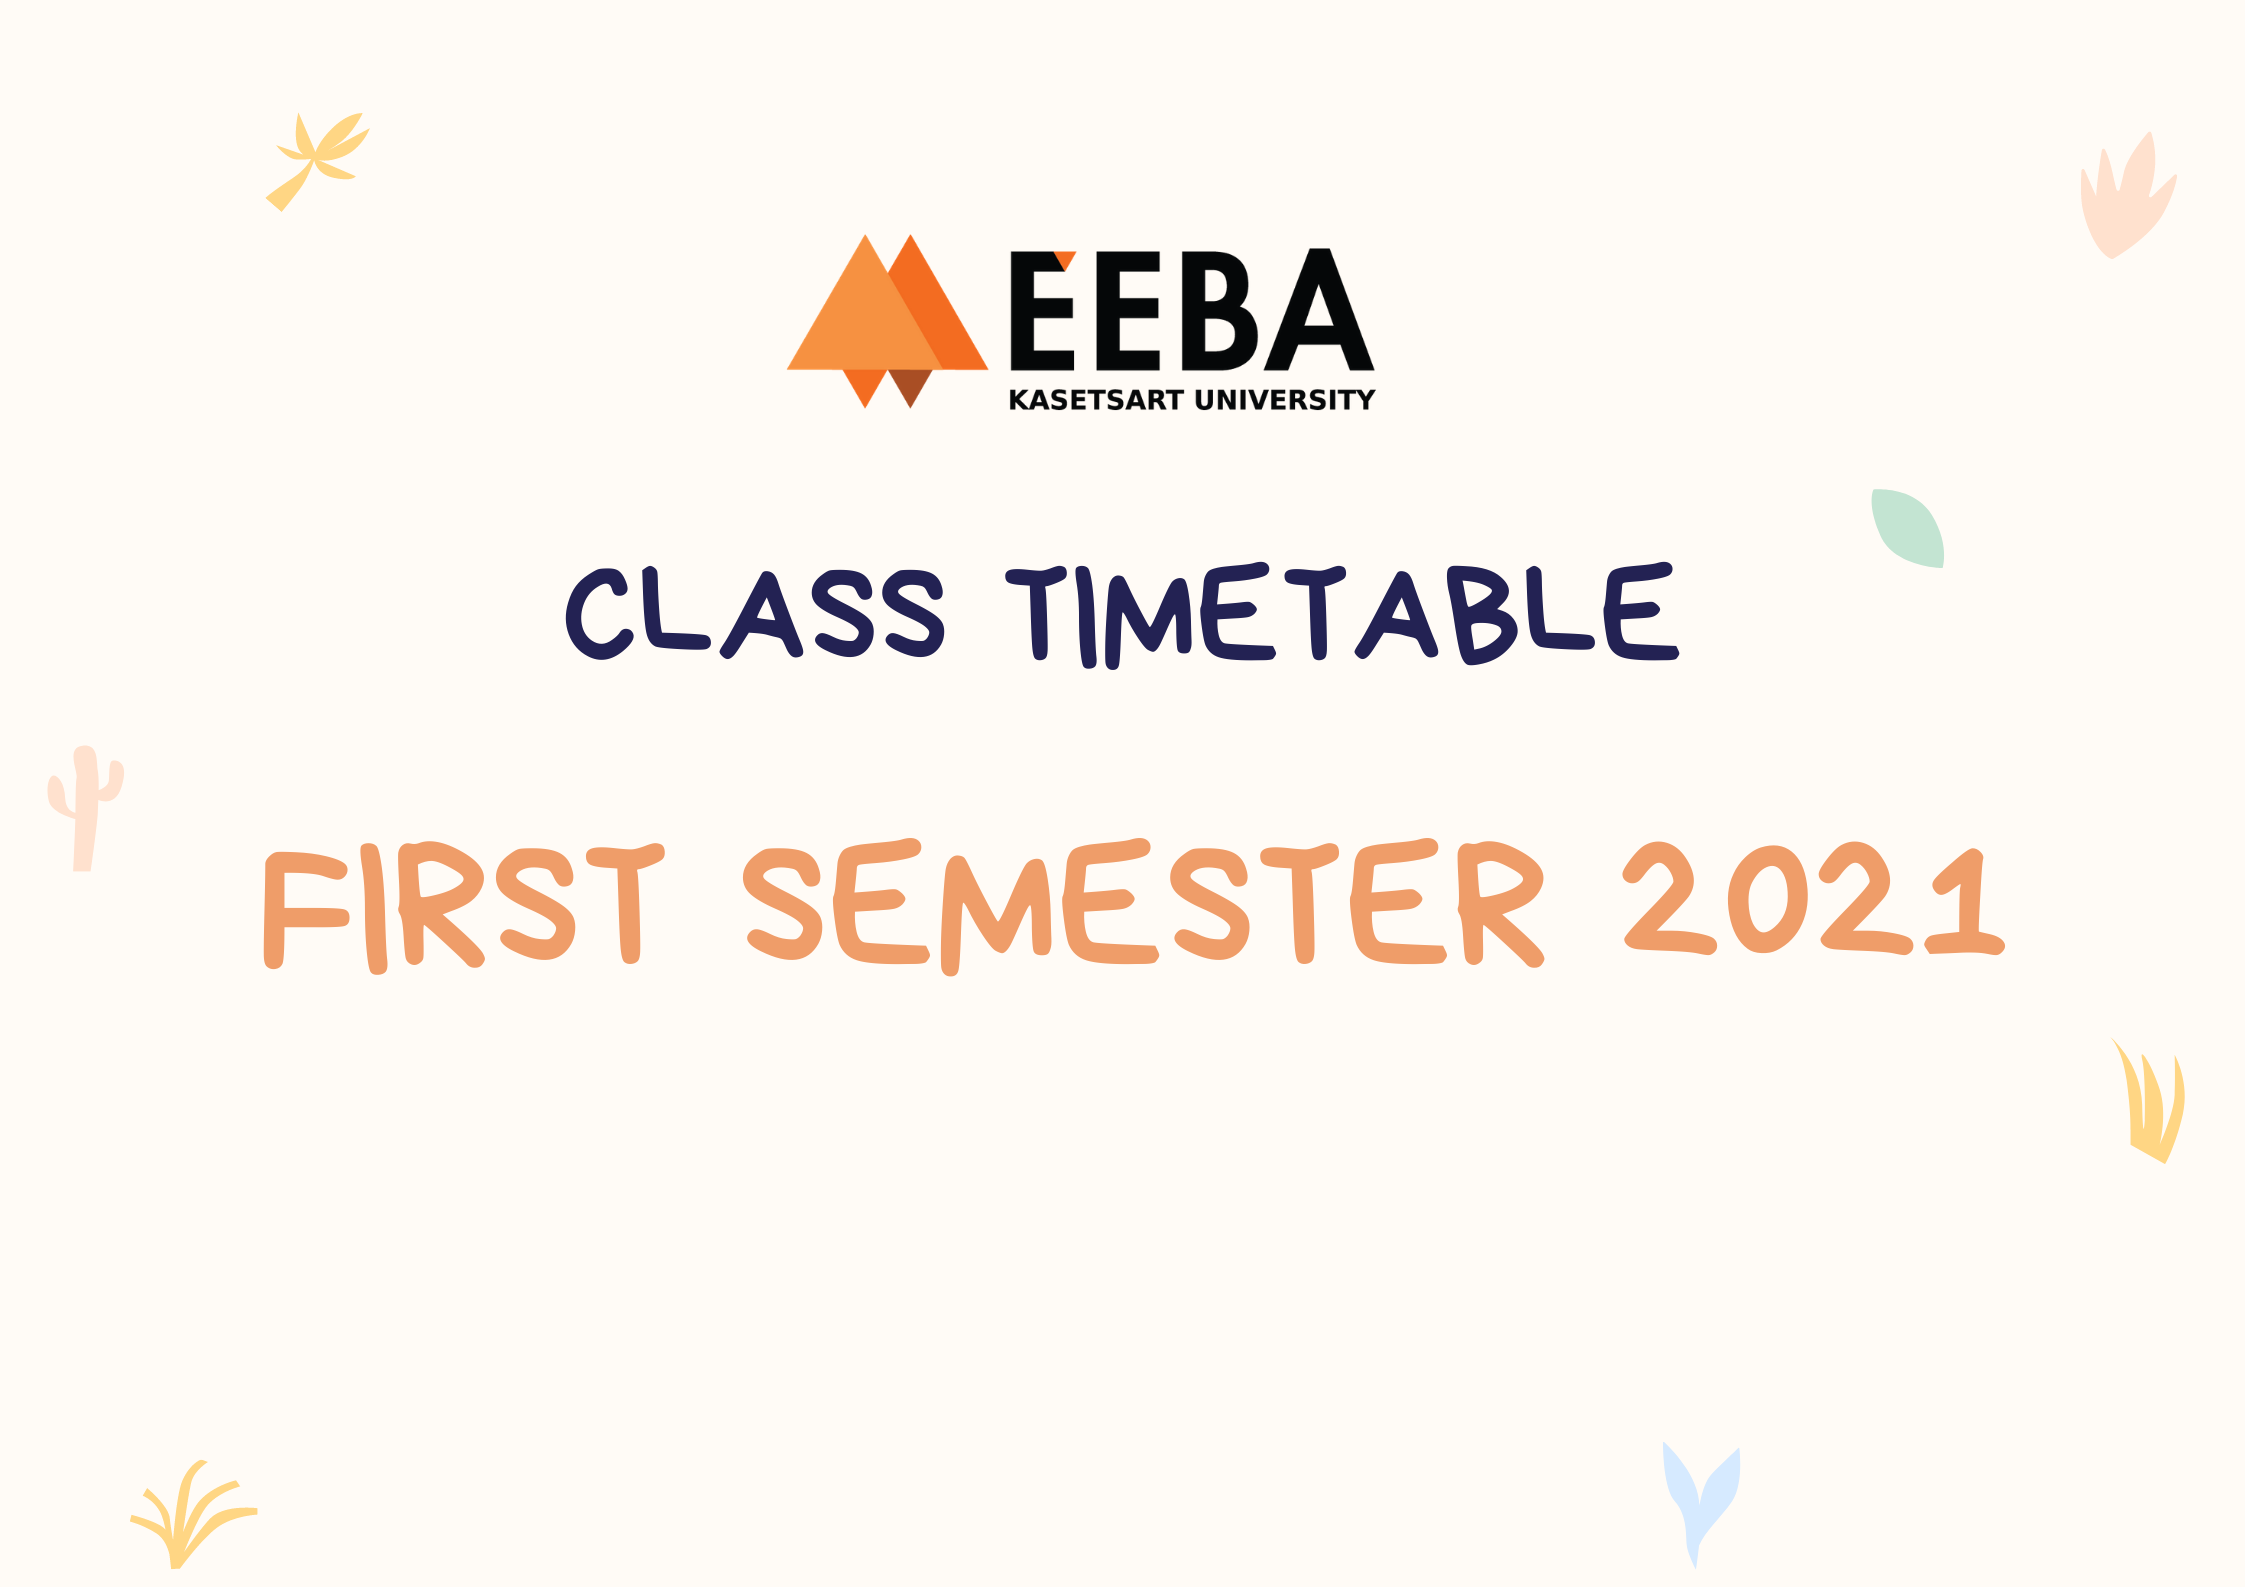 Class timetable for Semester 1, Academic Year 2021